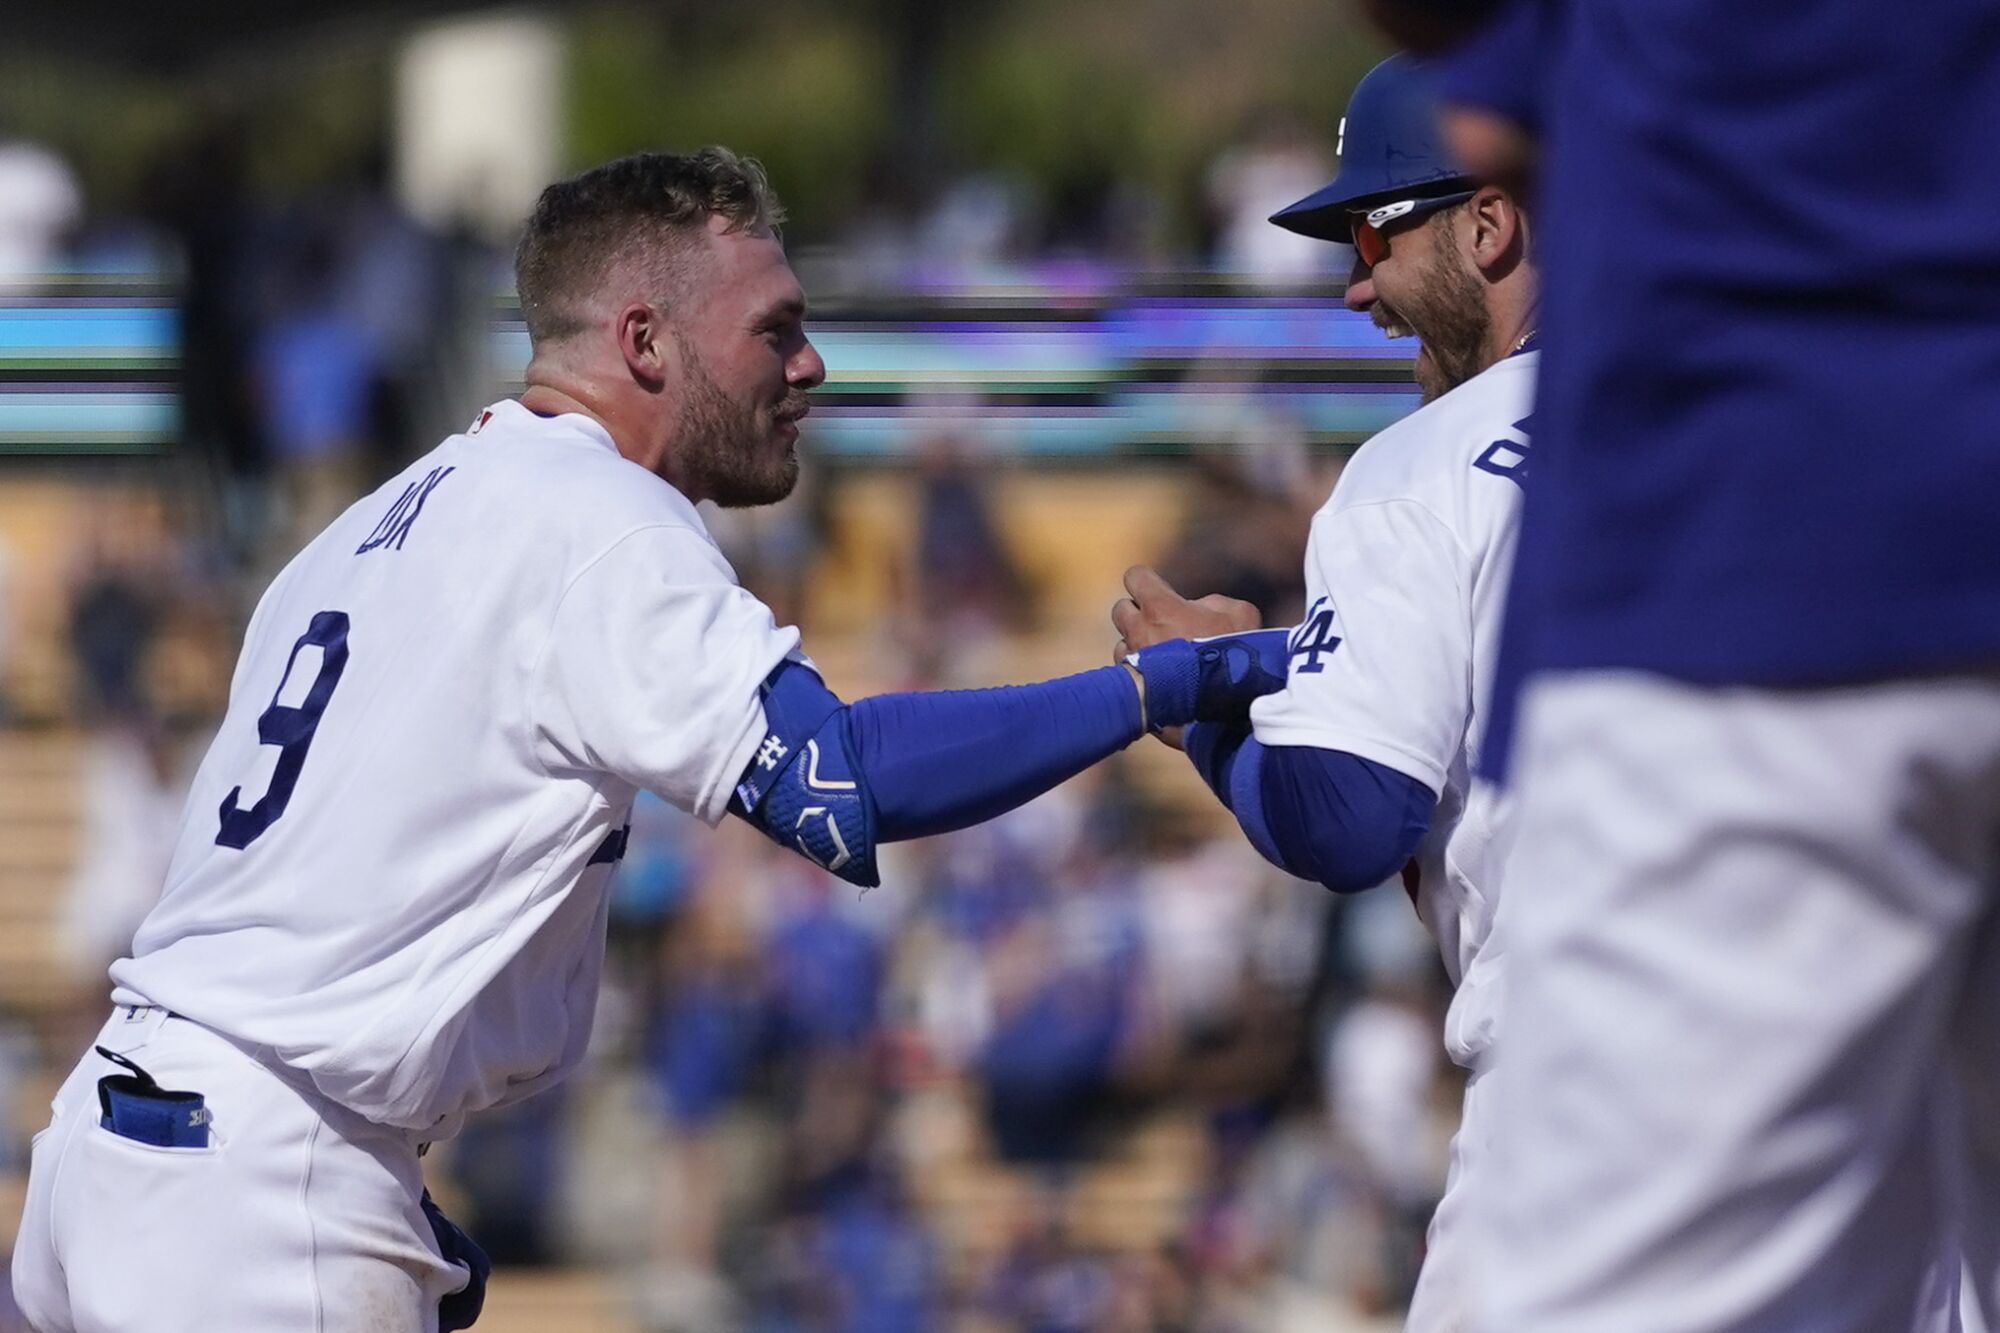 Gavin Lux, left, celebrates with Dodgers teammate Cody Bellinger after hitting a walk-off double in the ninth inning.